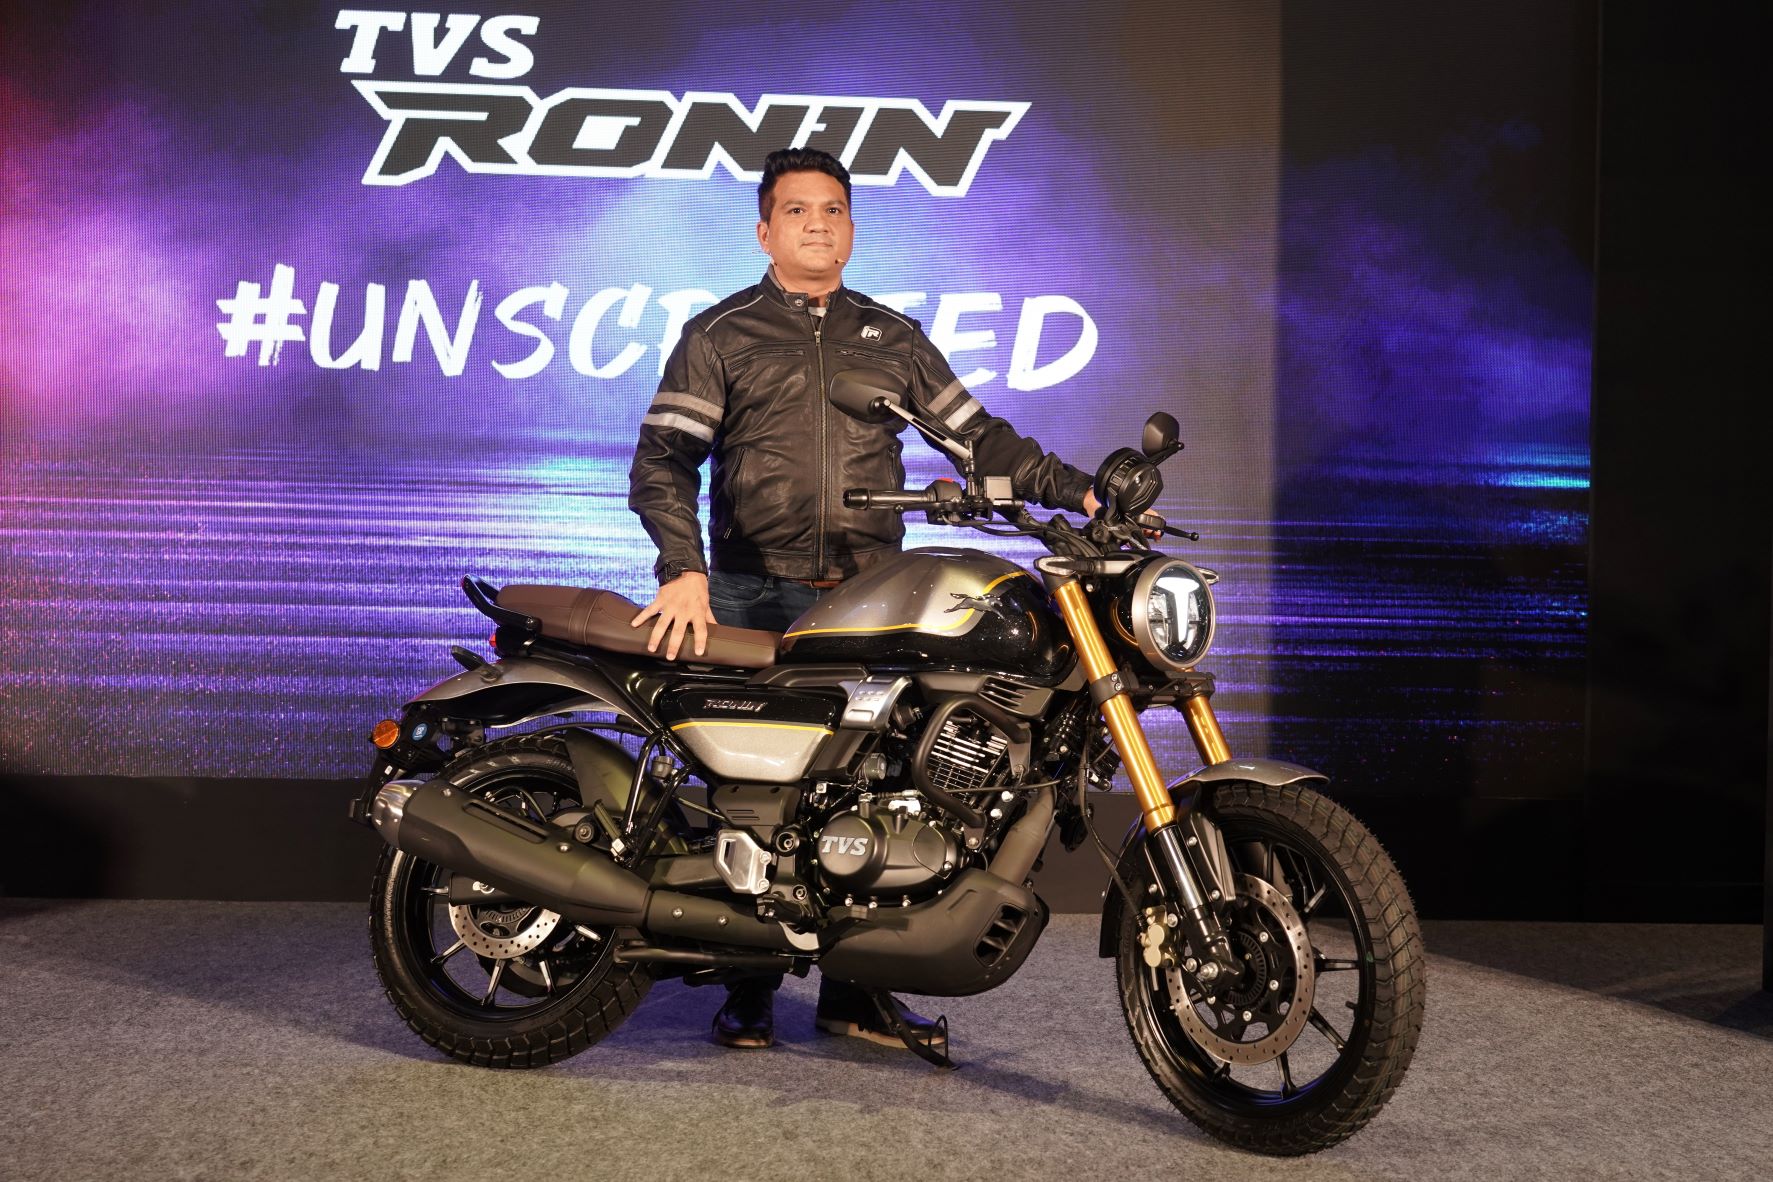 TVS Motor Company launches the all-new TVS RONIN in Kerala; forays into the premium lifestyle segment by launching the industry-first ‘modern-retro’ motorcycle